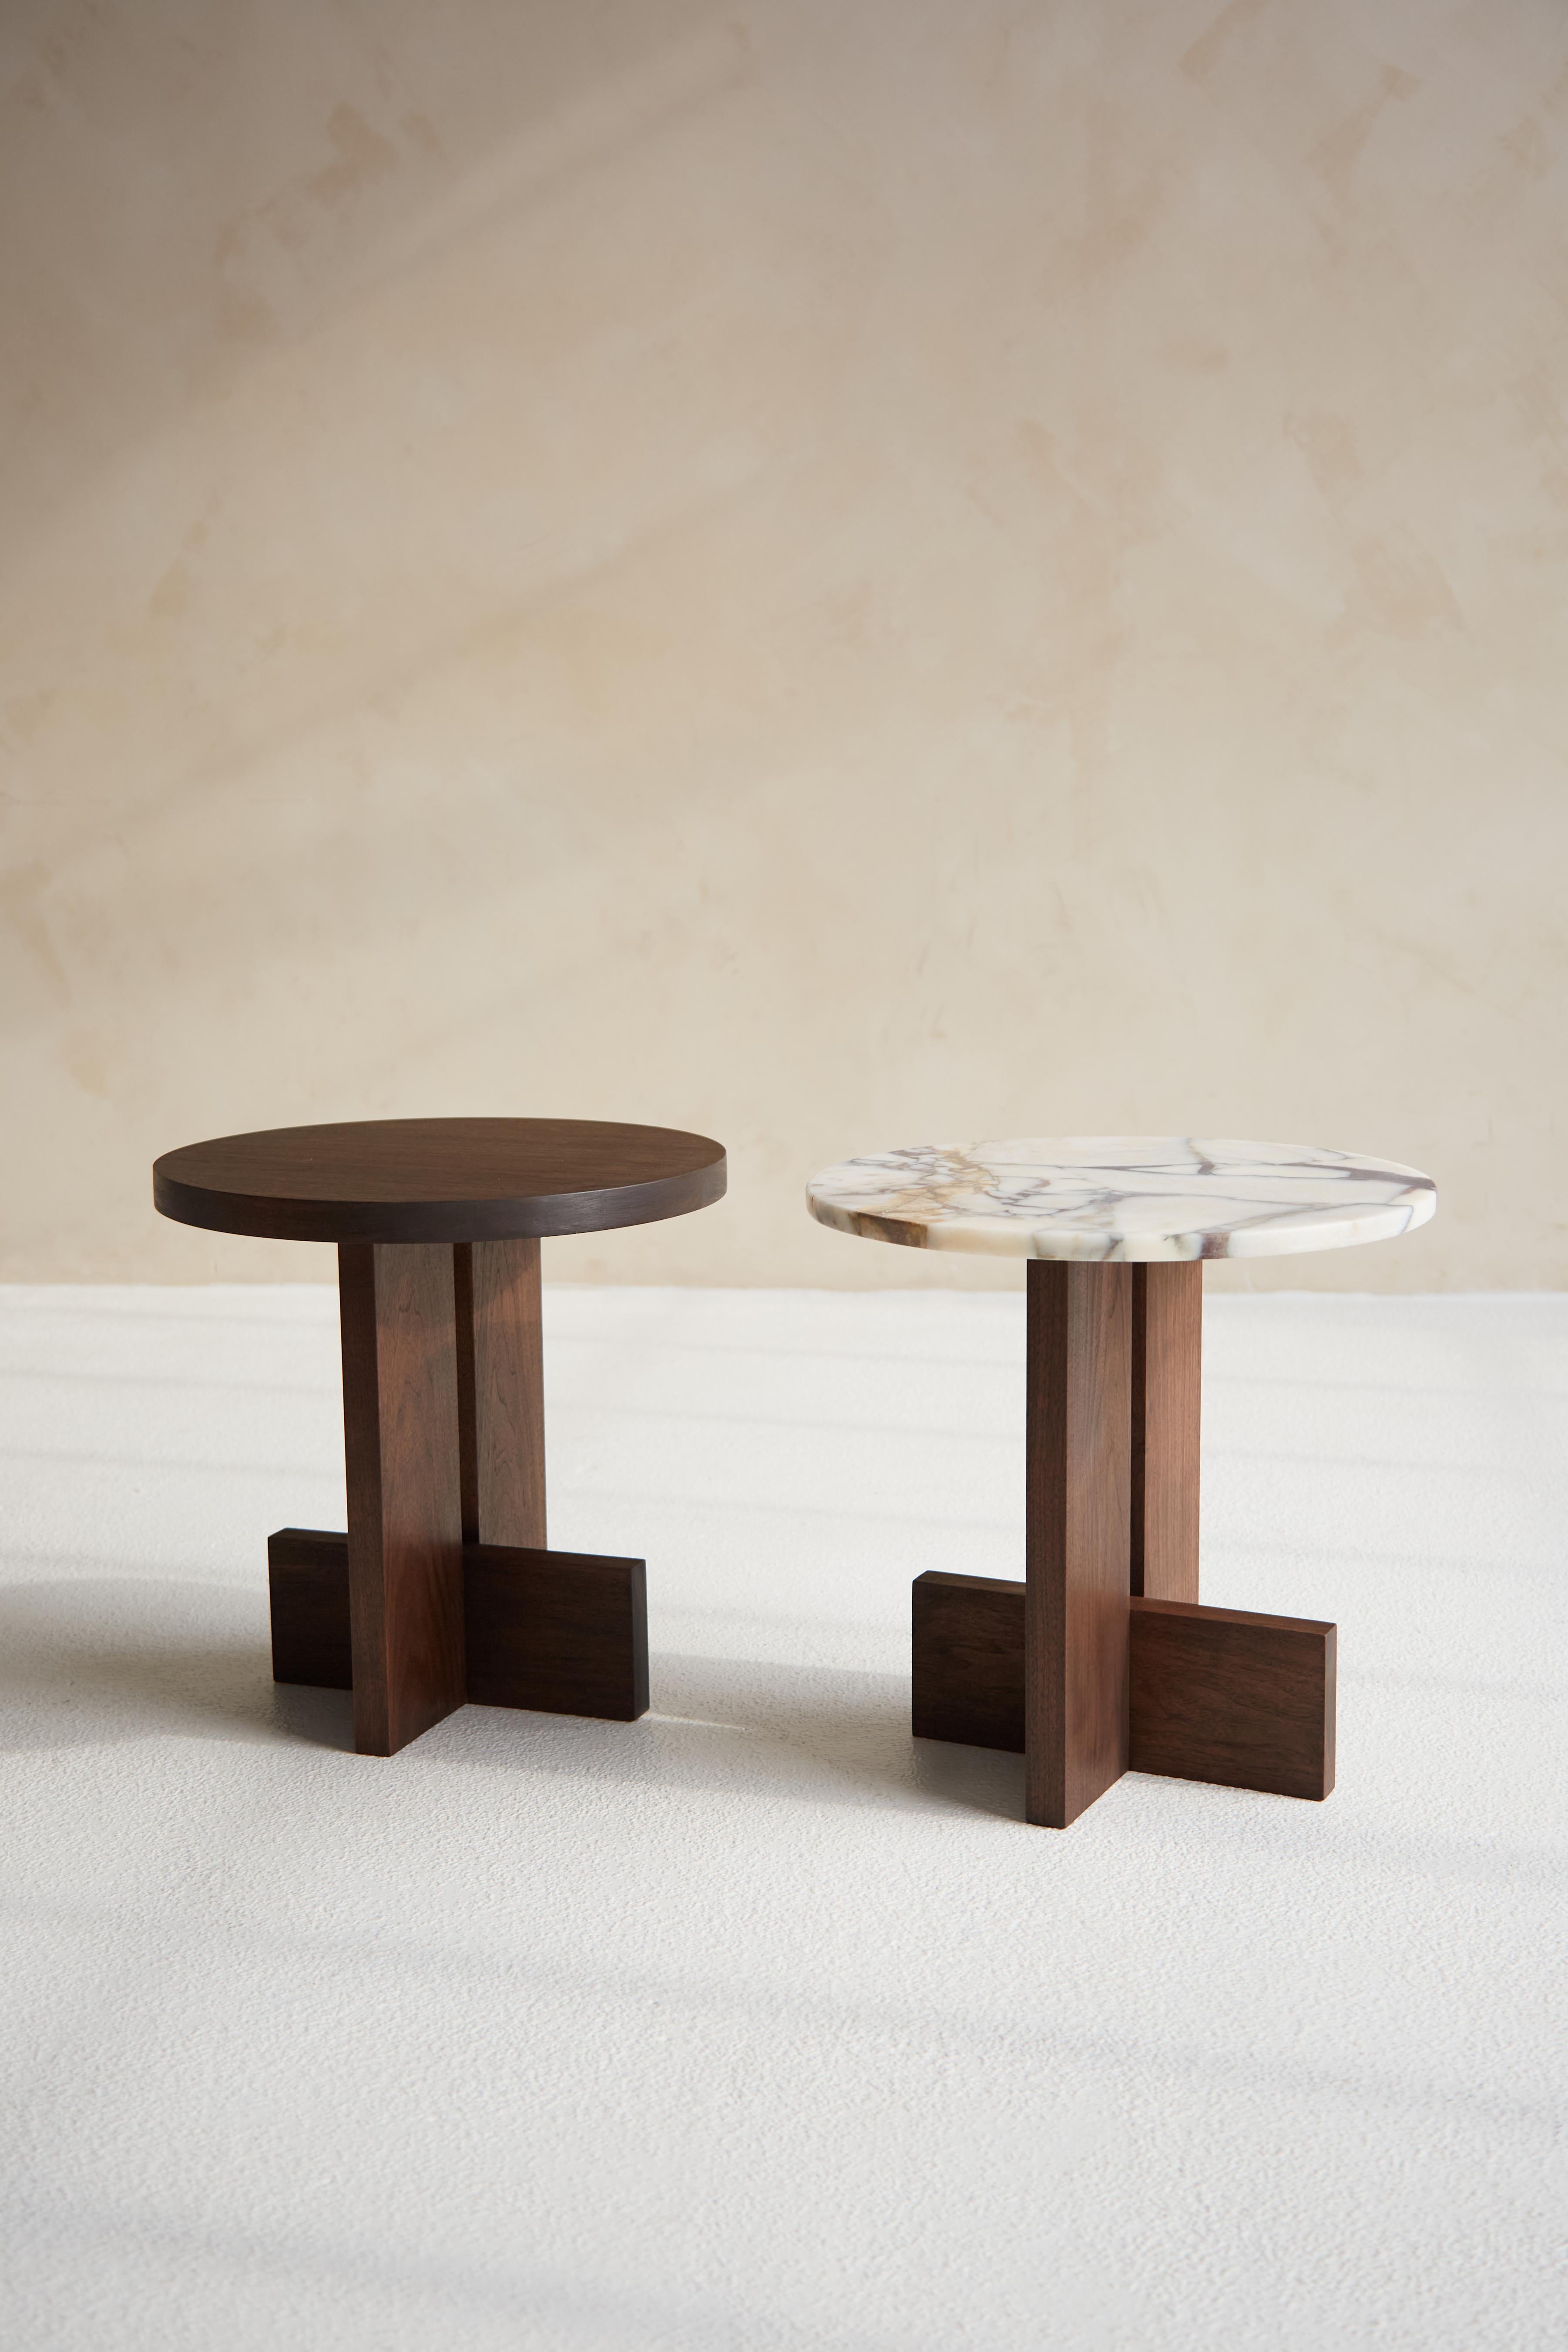 Organic Modern Calcatta Viola Marble-Topped & Walnut Base Side Table by Mary Ratcliffe Studio For Sale